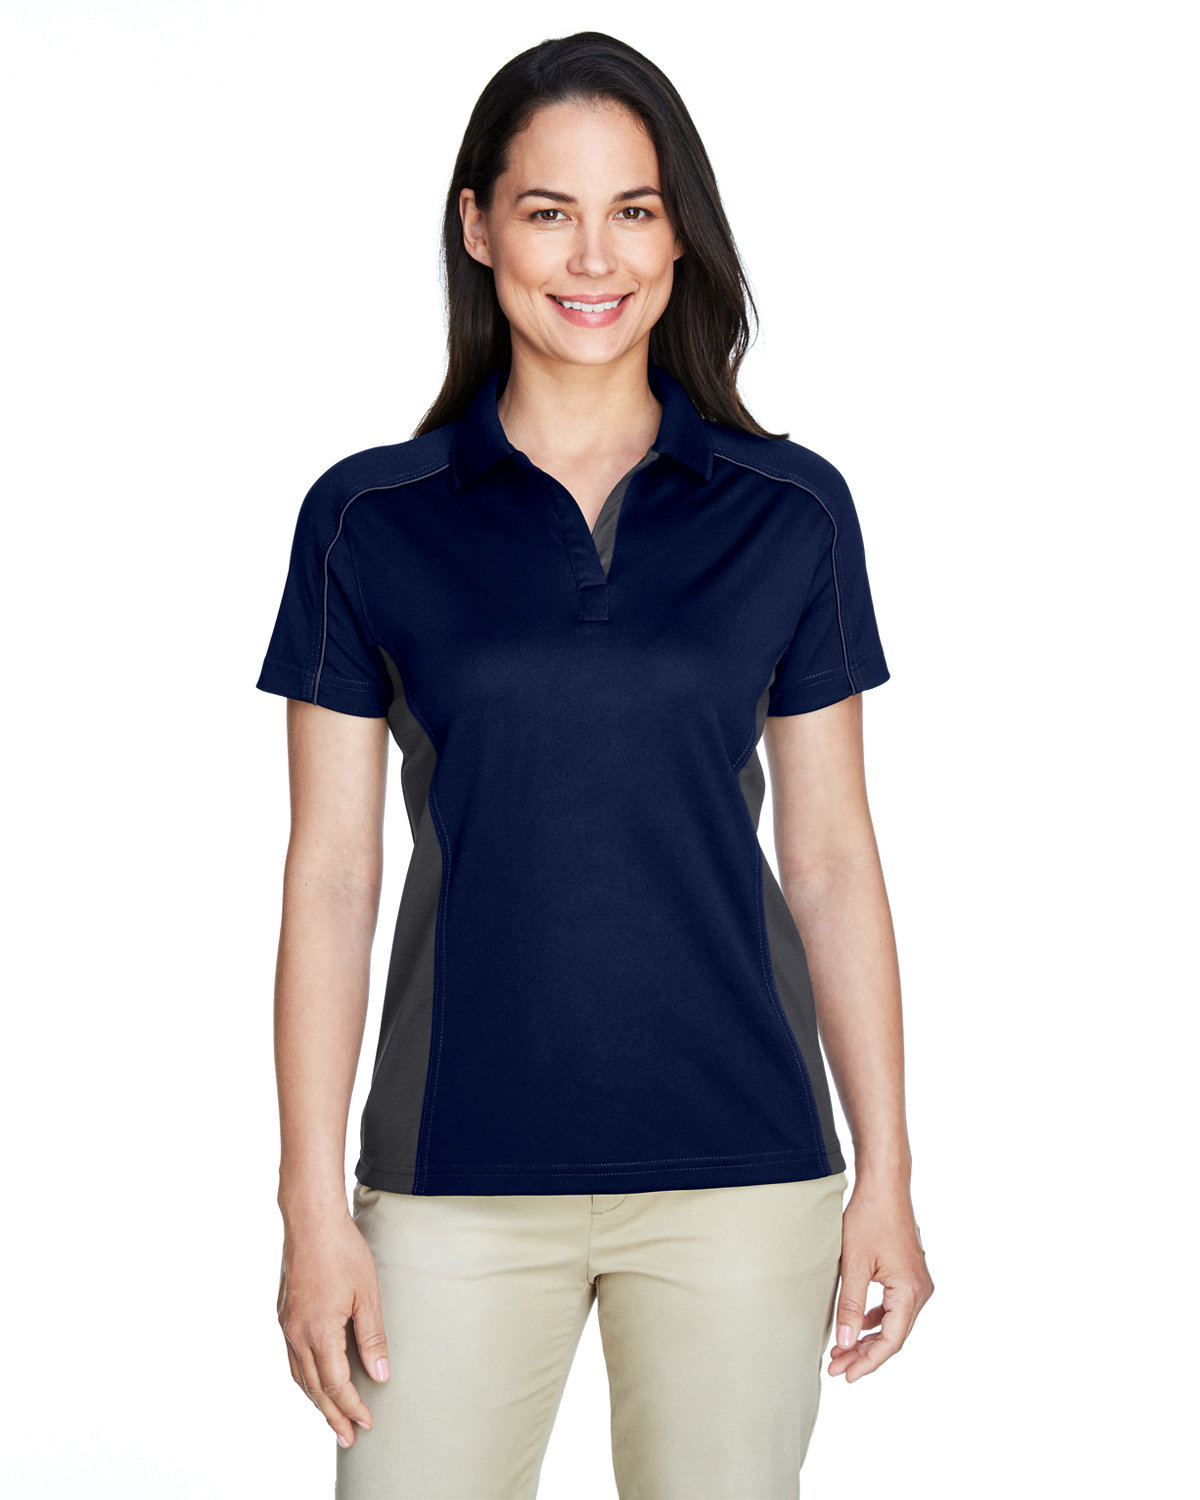 Extreme Ladies' Eperformance™ Fuse Snag Protection Plus Colorblock Polo CLASC NAVY/ CRBN 